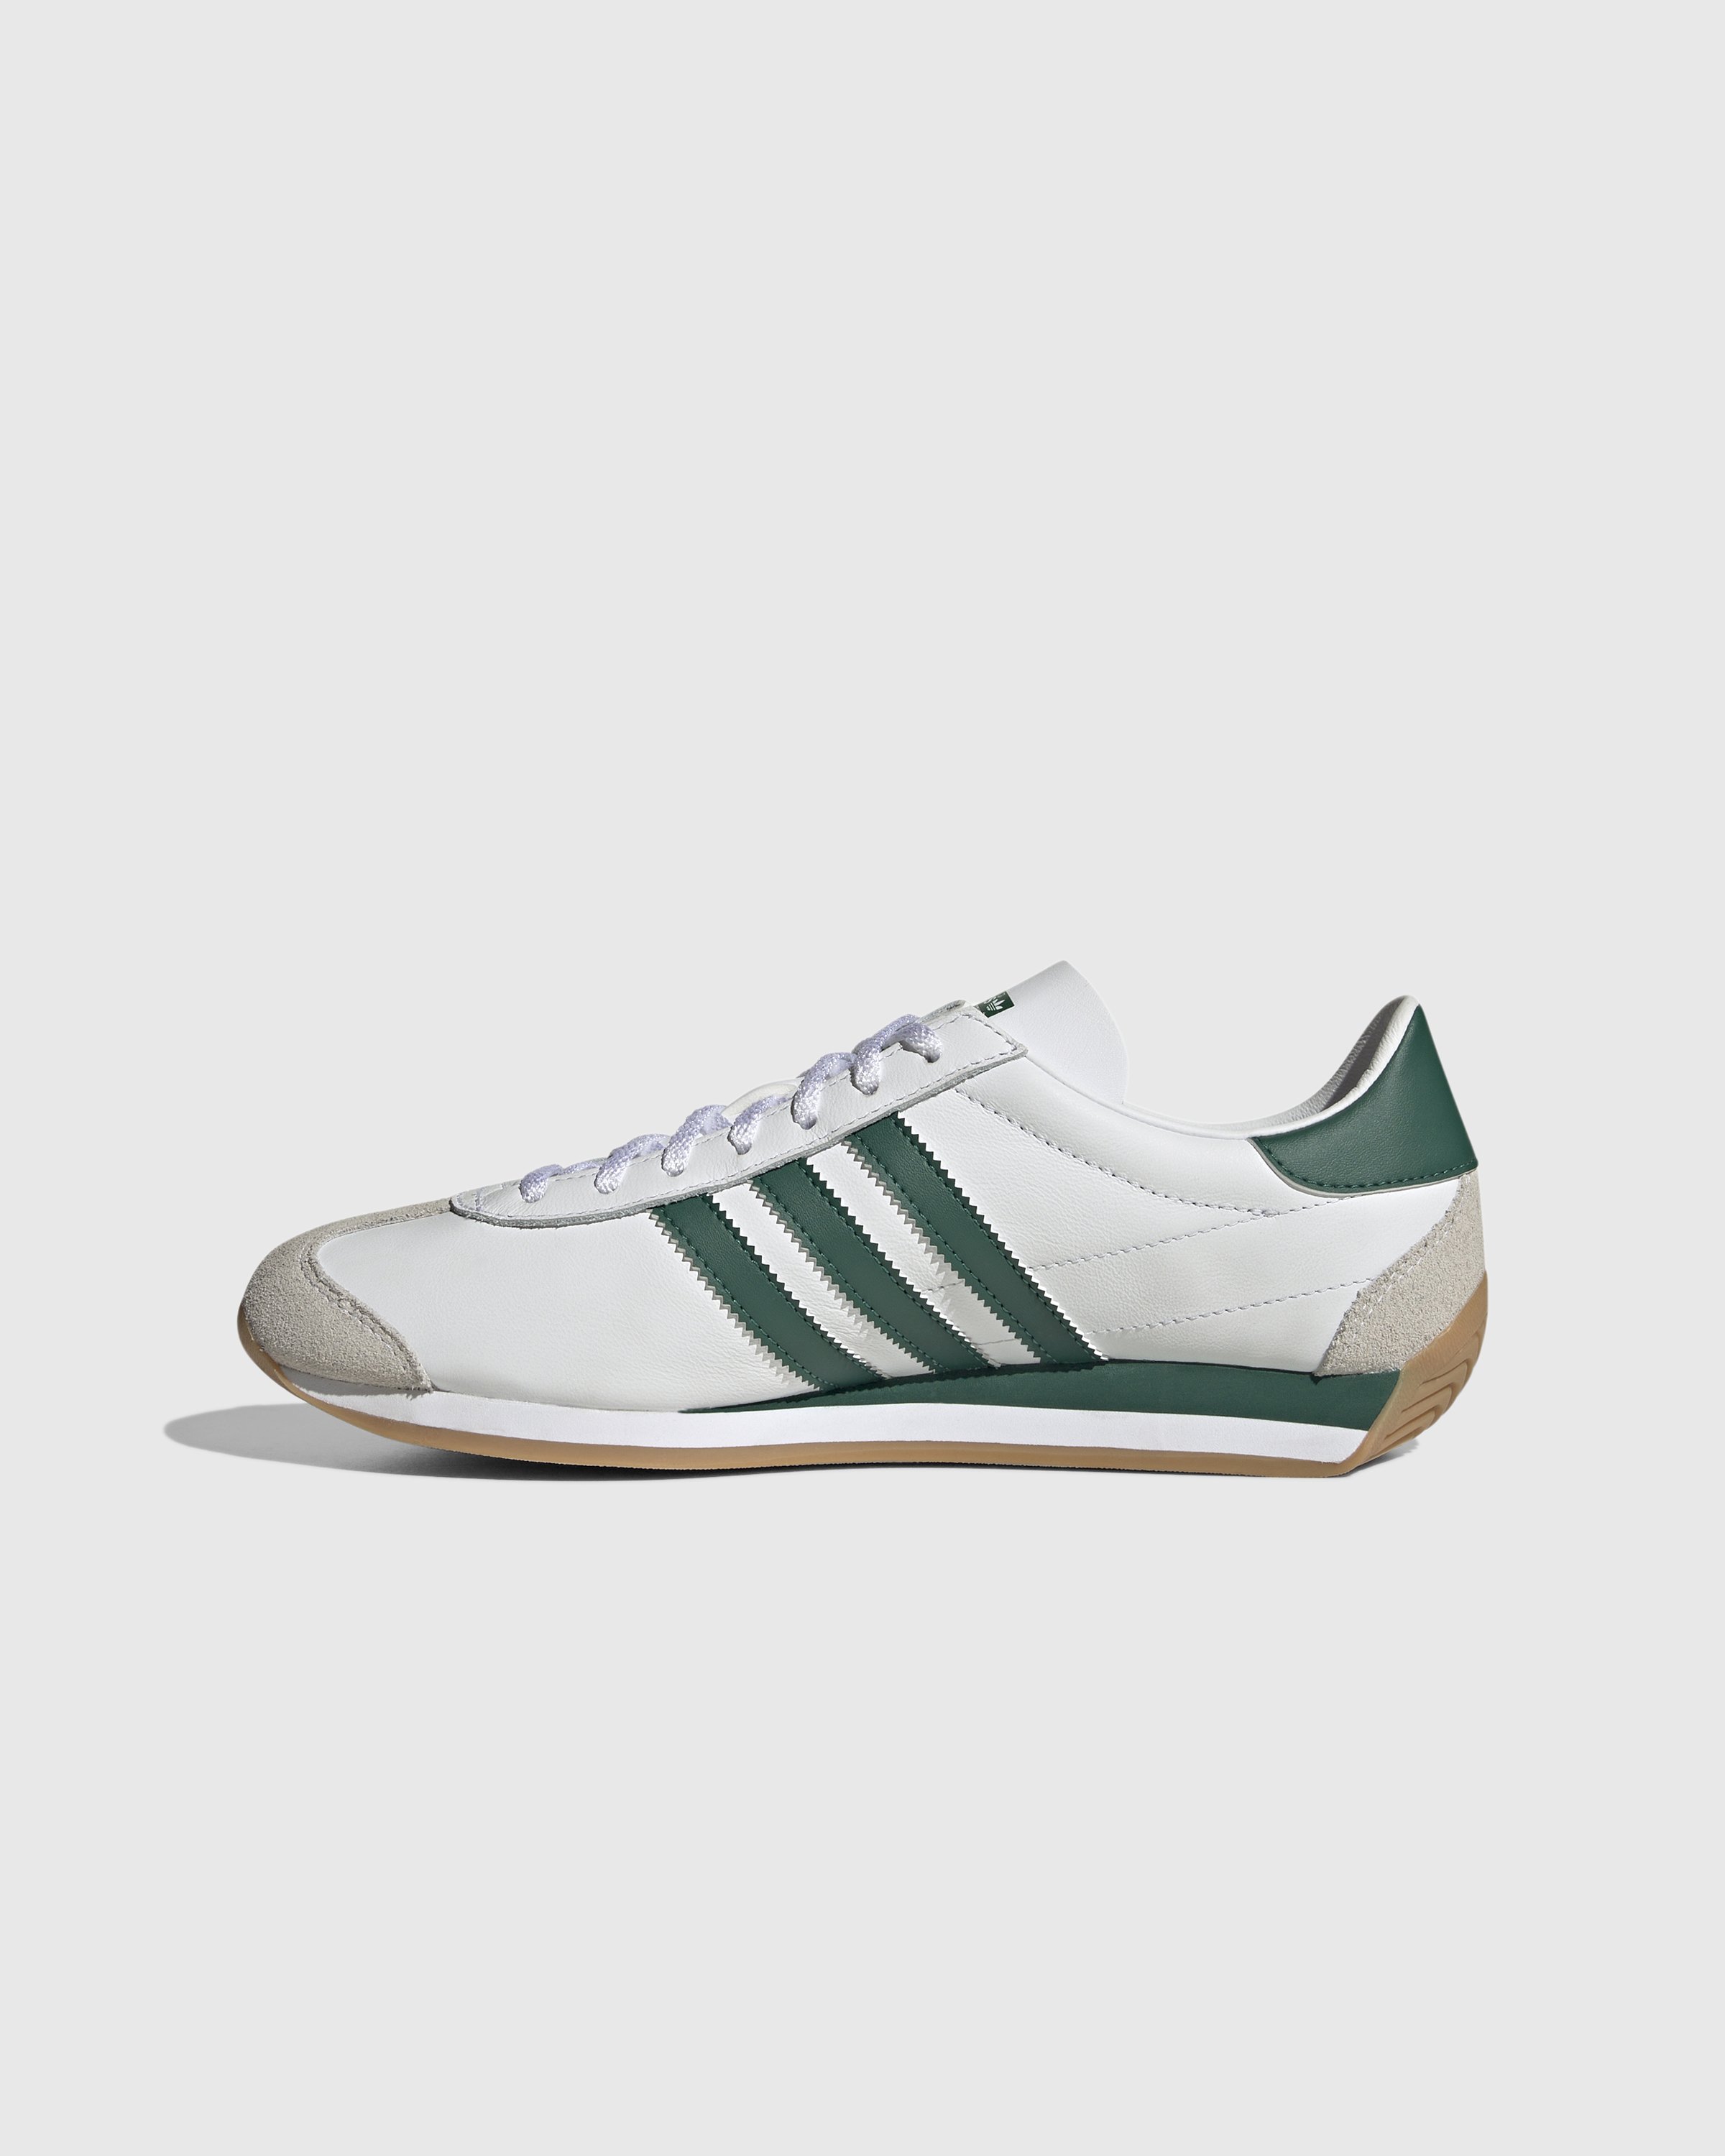 Adidas - Country OG Cloud White/Collegiate Green - Footwear - White - Image 2